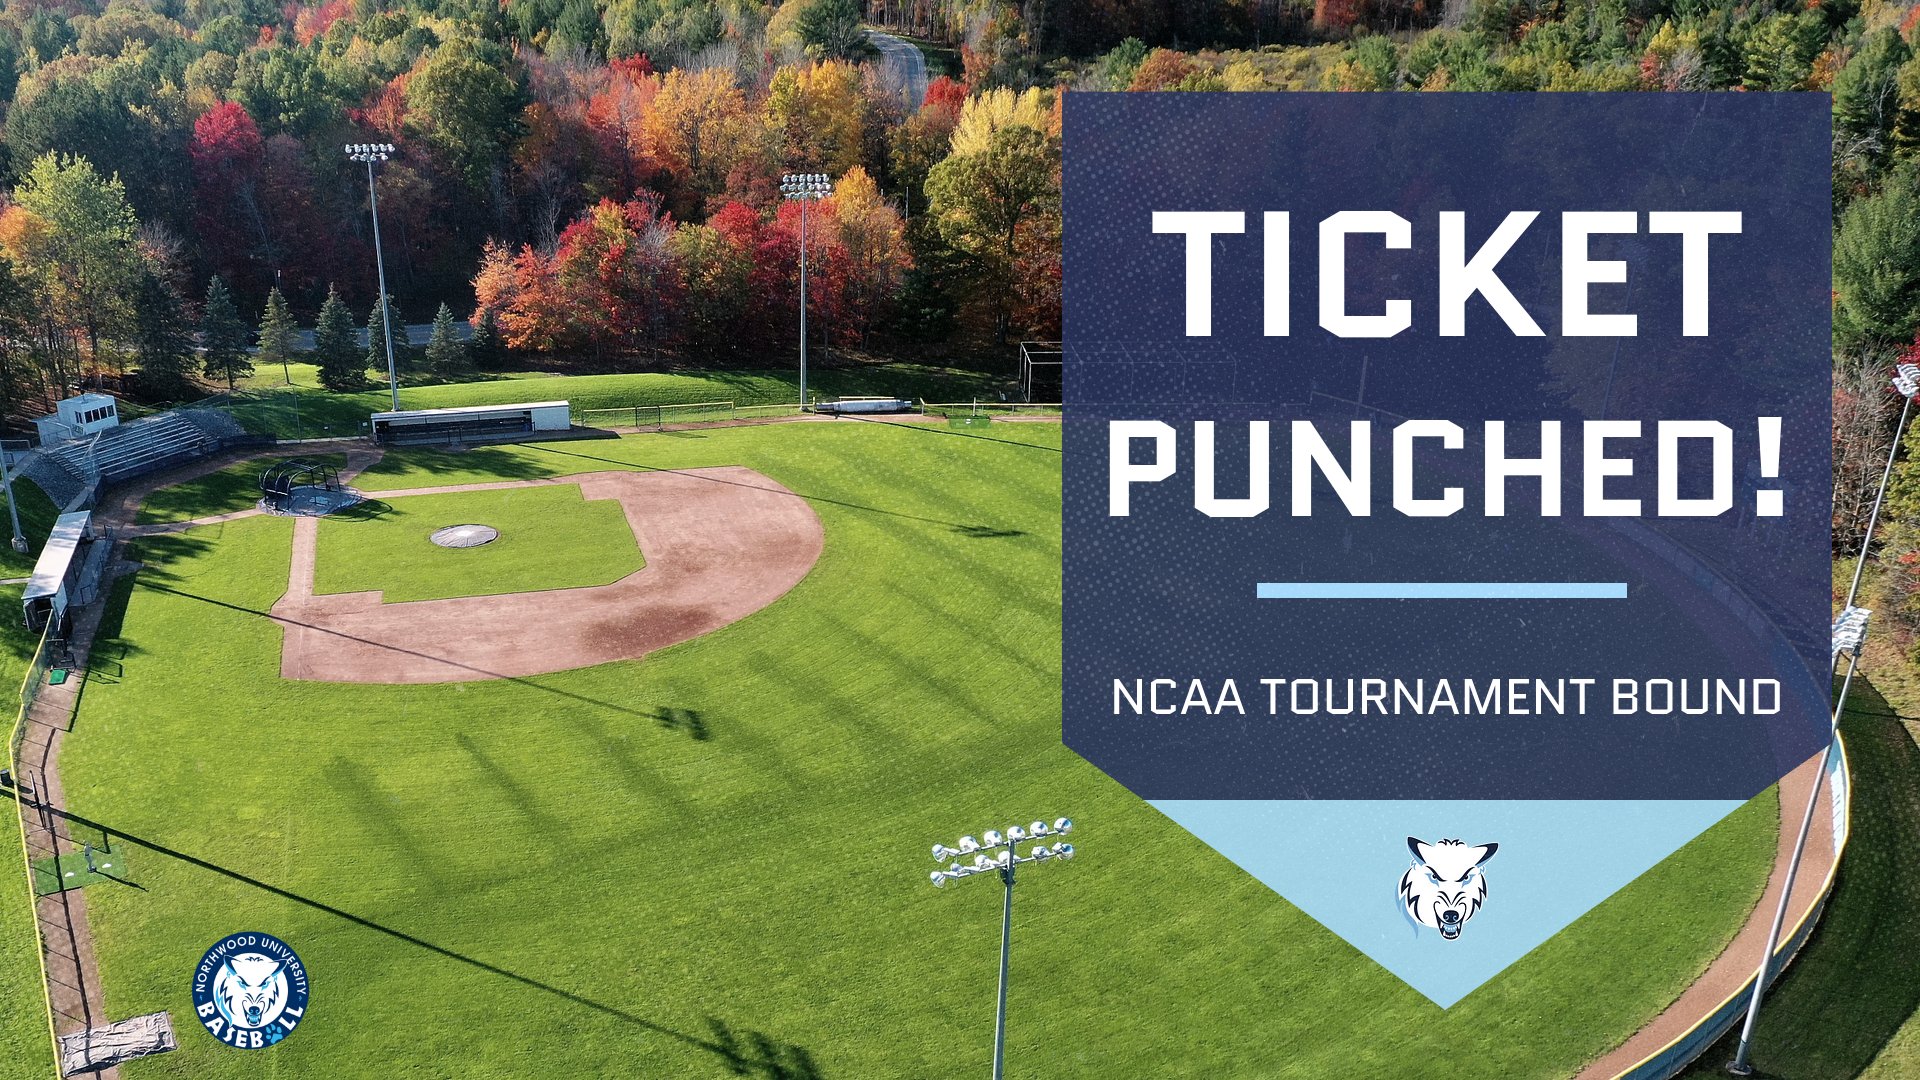 TICKET PUNCHED! Baseball Makes Fifth Straight Trip To The NCAA Tournament